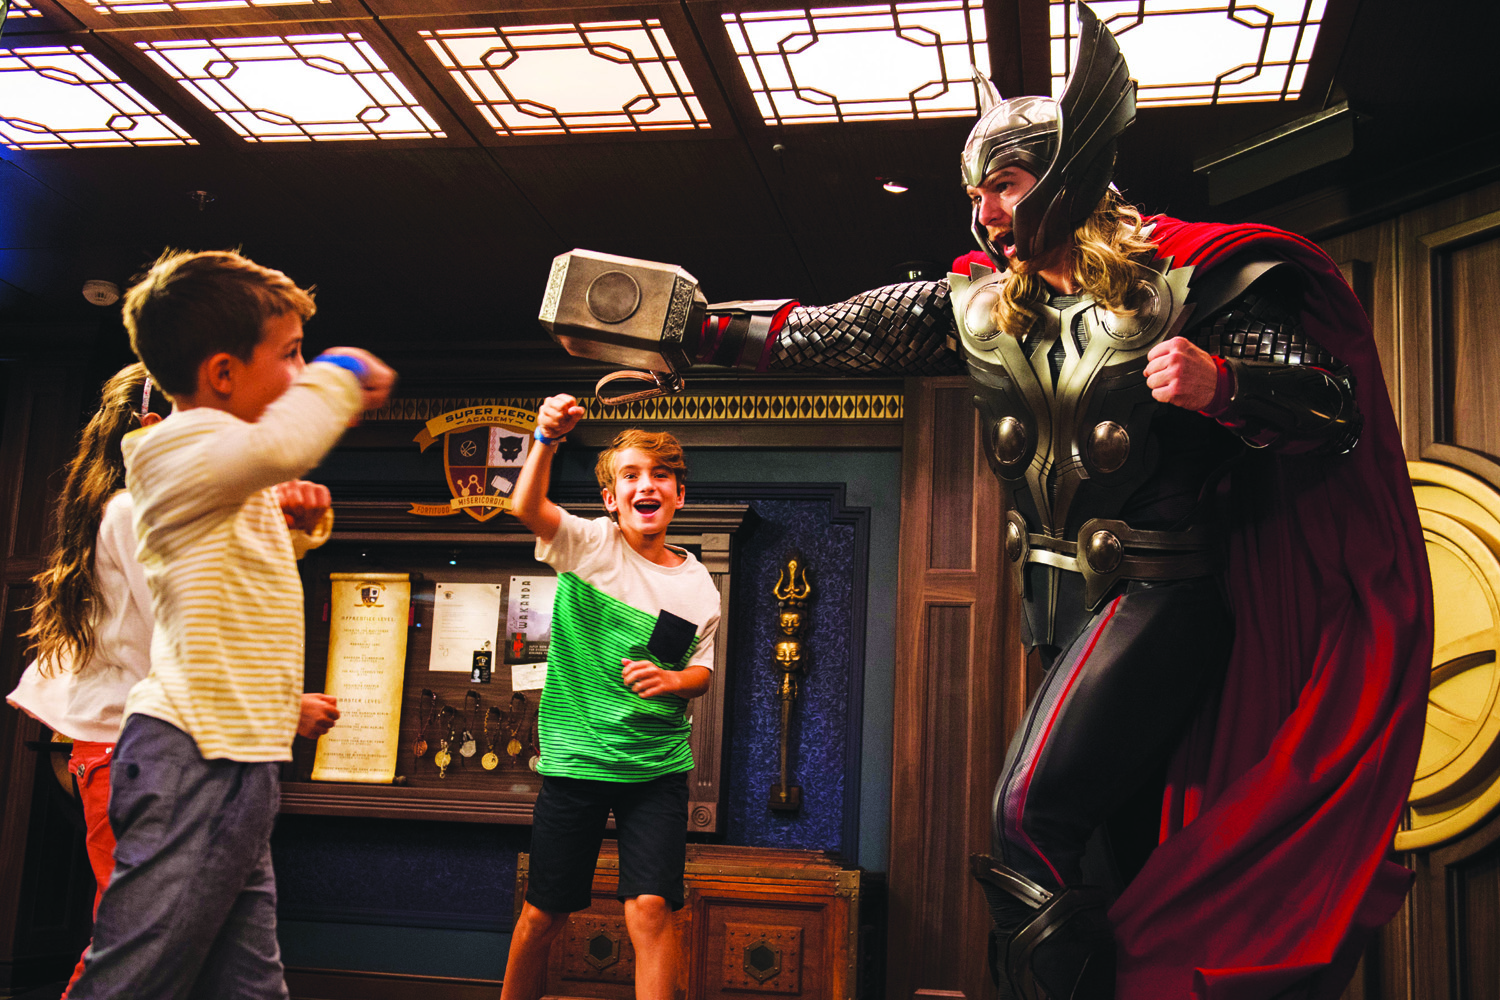 In Disney’s Oceaneer Club aboard the Disney Fantasy, young guests come face-to-face with the mighty Thor to discover what it takes to become a true hero. Children build and decorate their own hammers, similar to Thor’s own Mjolnir and learn how to use them to battle evil forces.